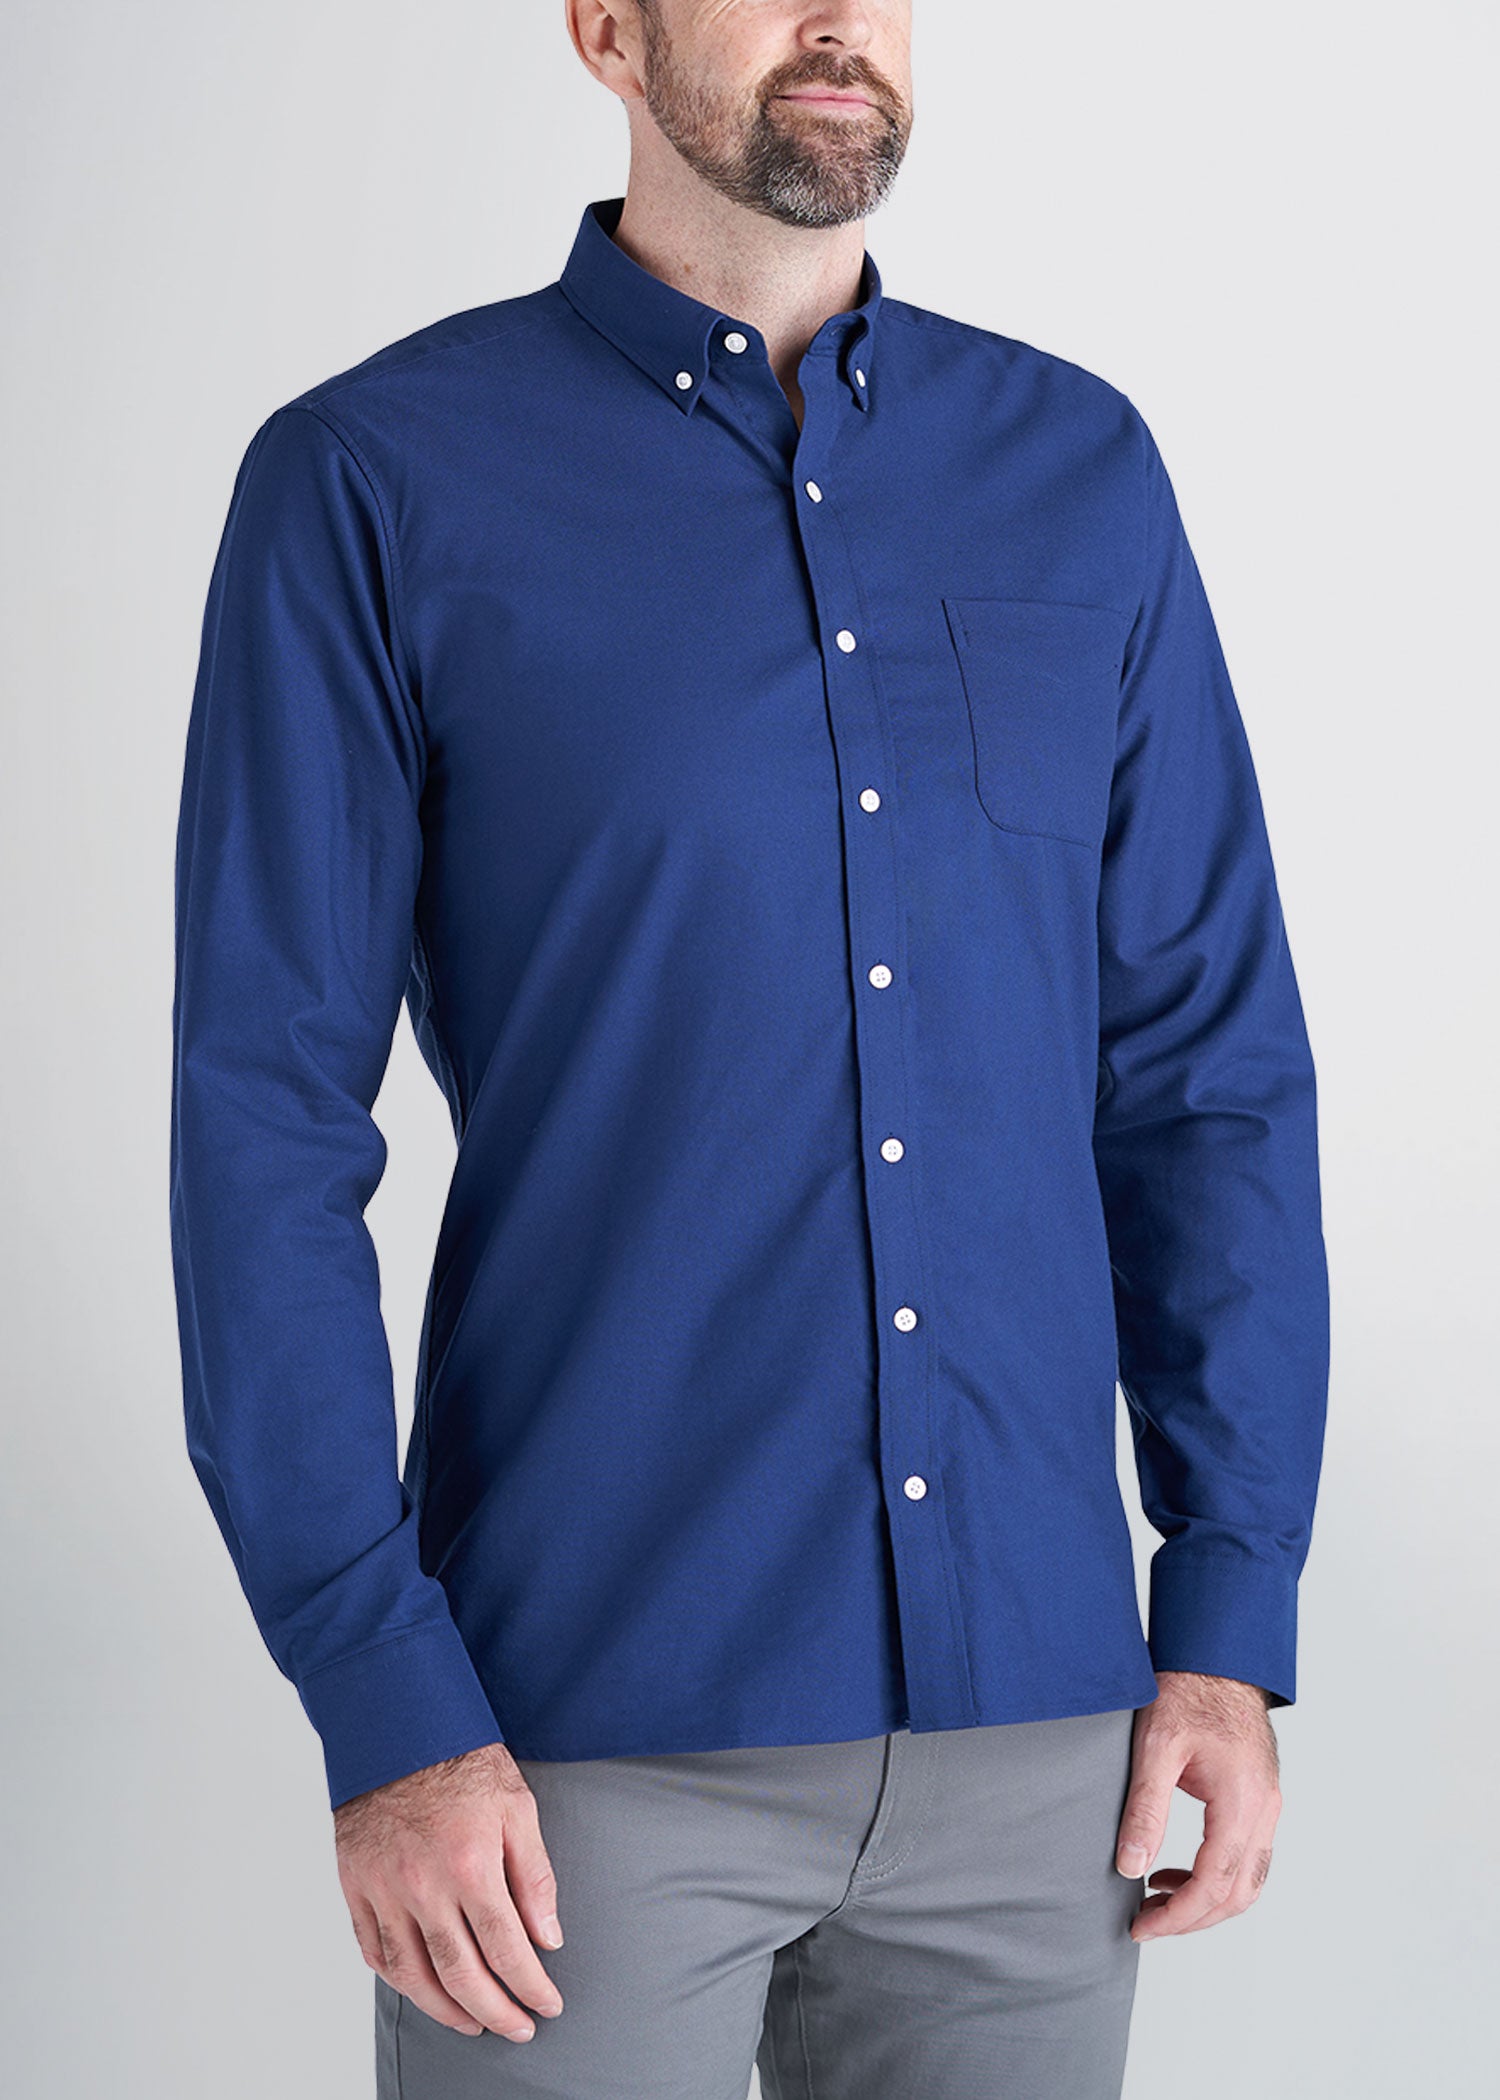 american-tall-mens-oxford-blue-front